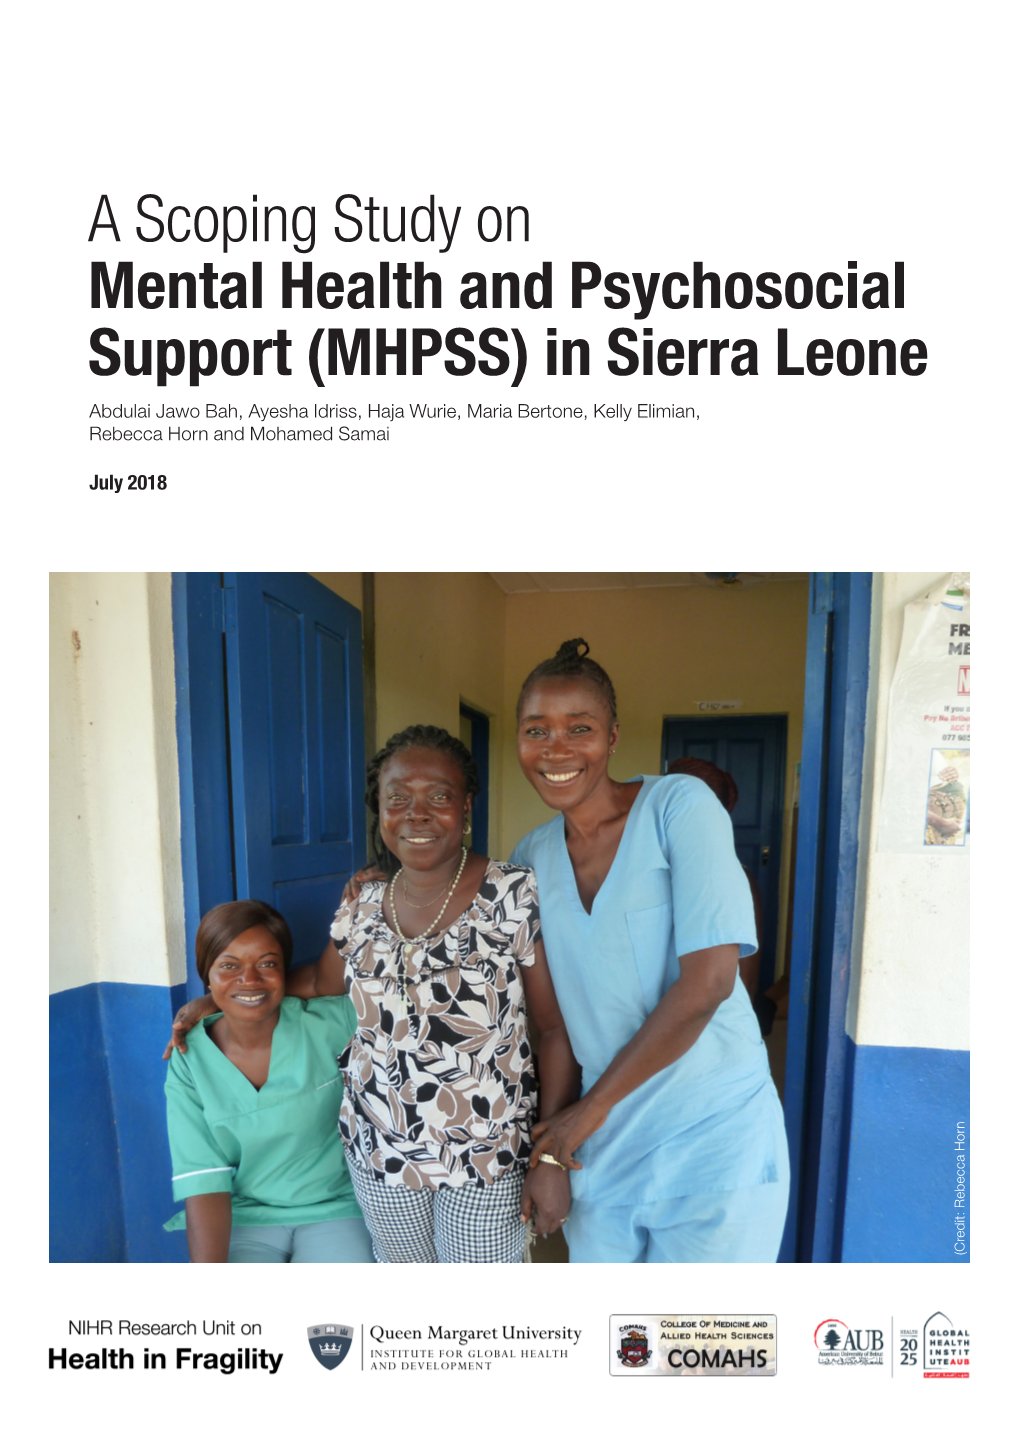 A Scoping Study on Mental Health and Psychosocial Support (MHPSS